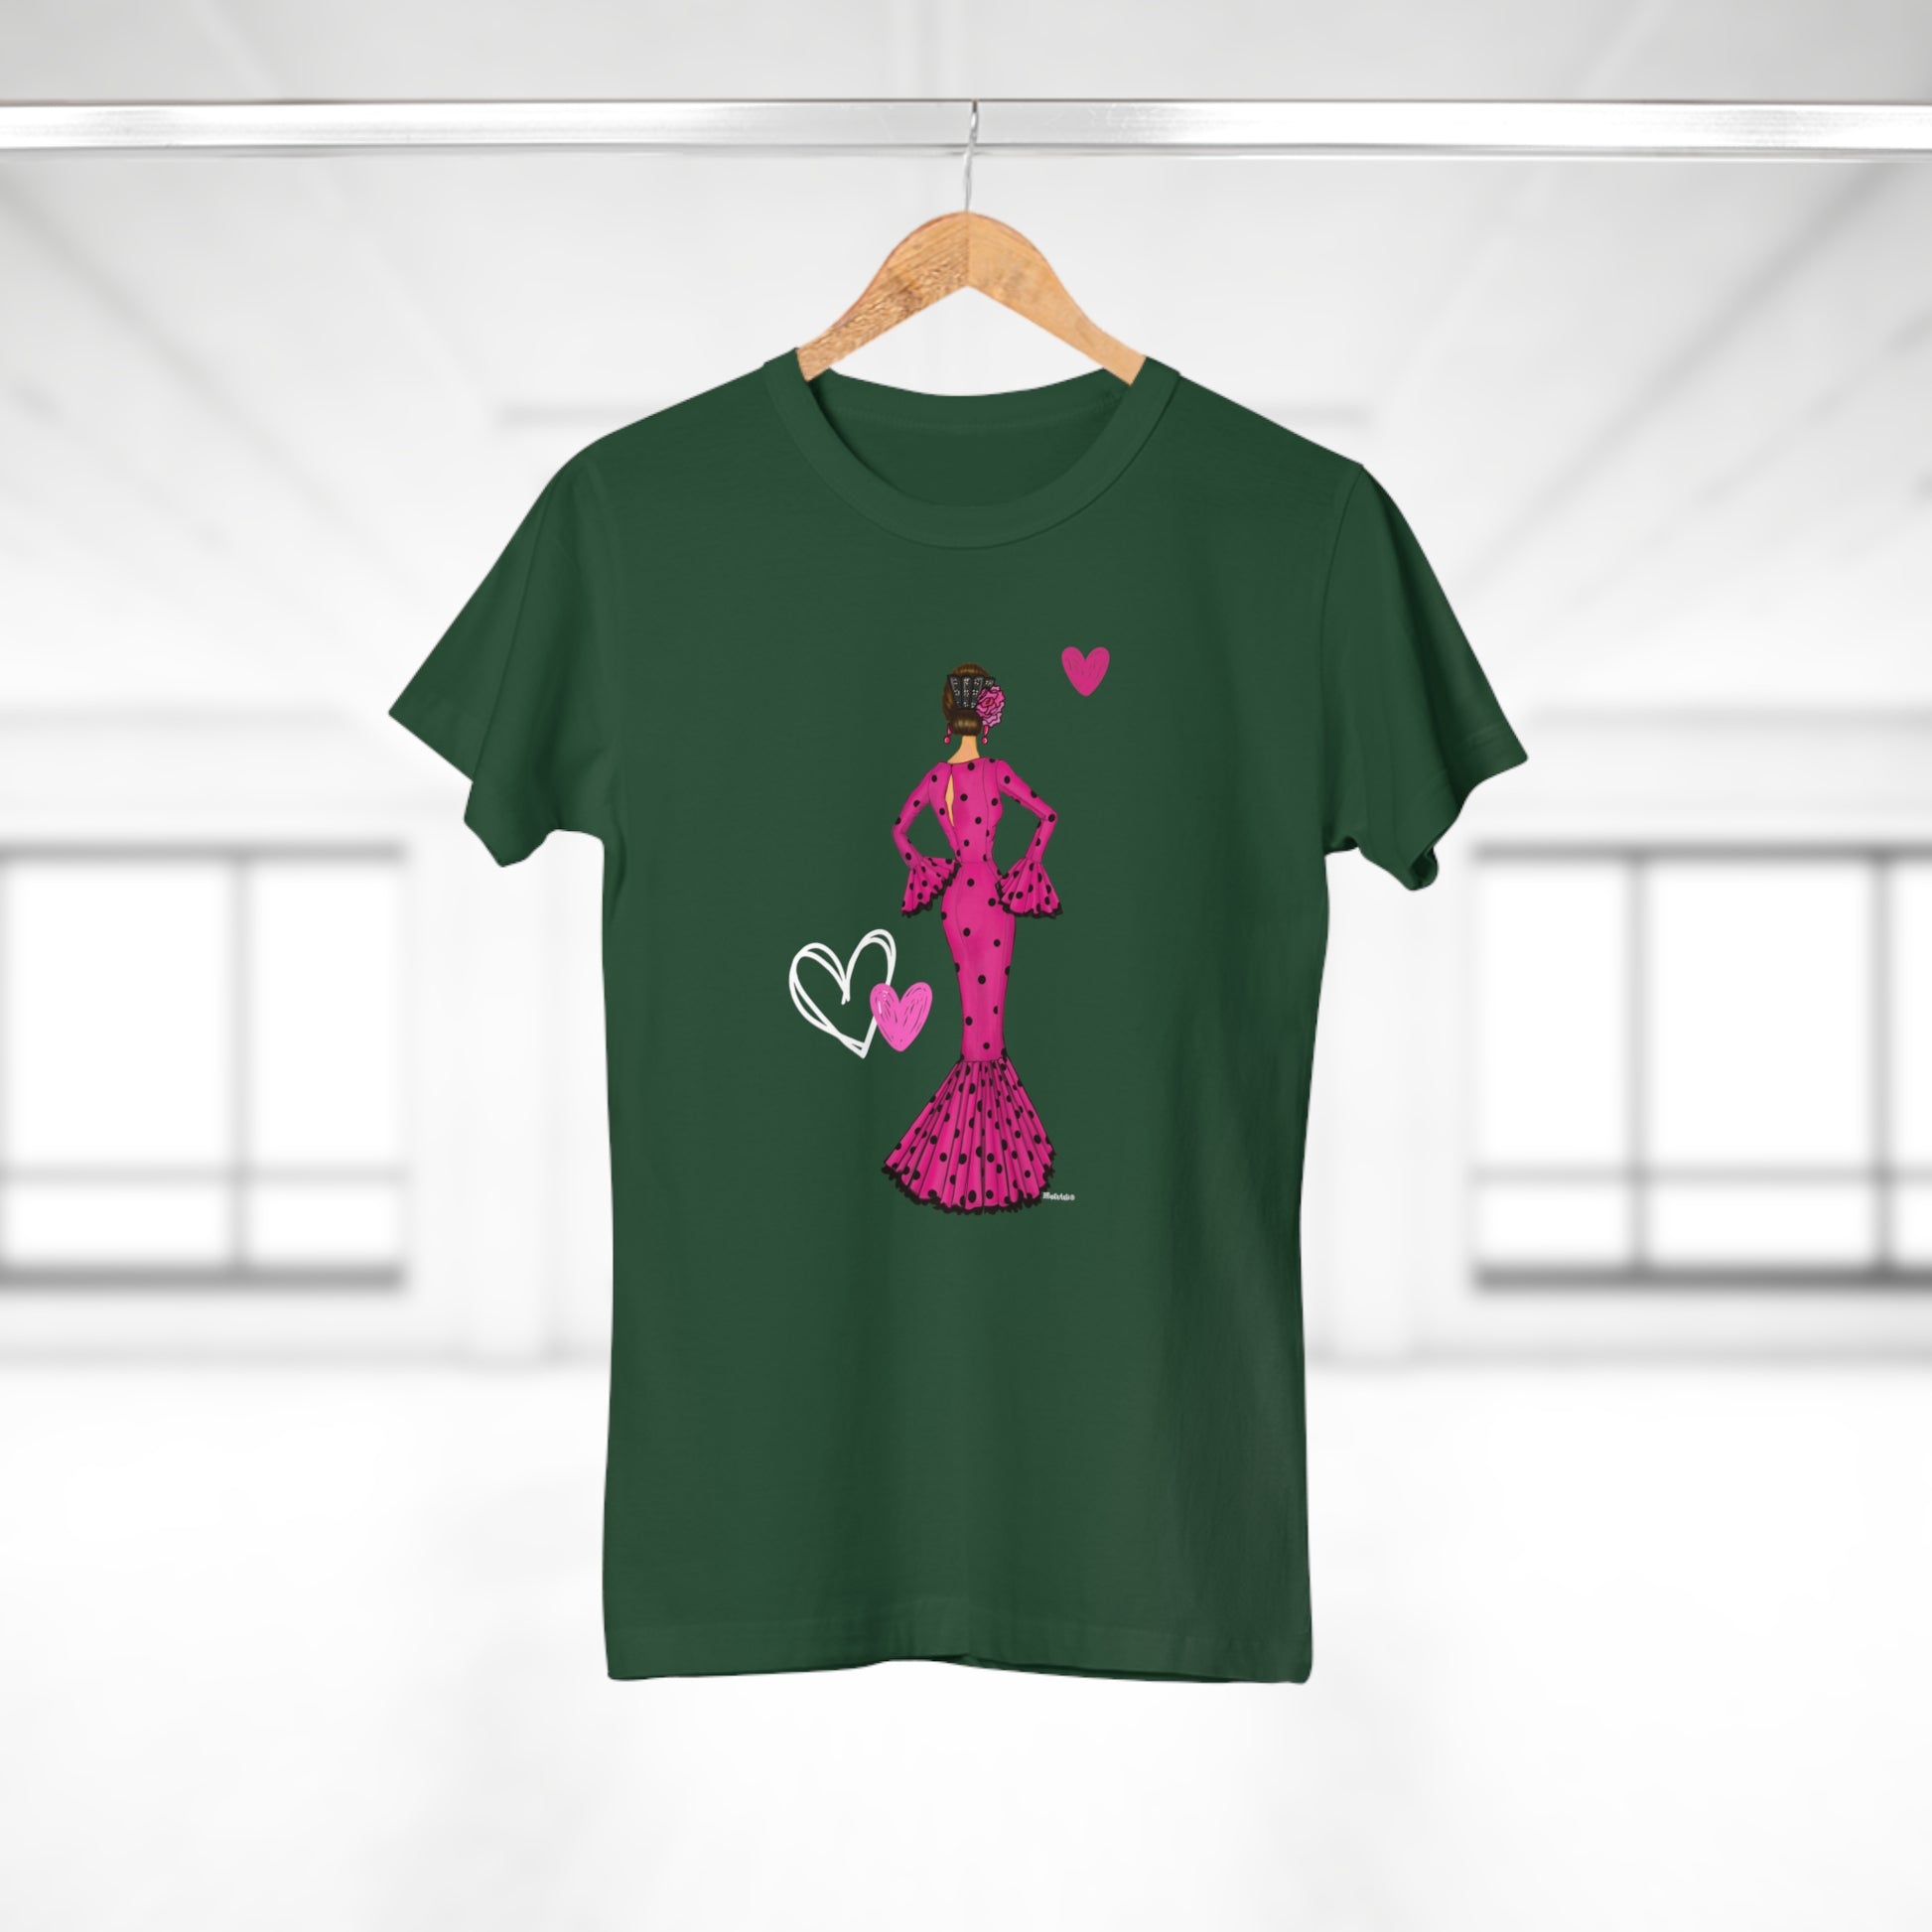 a green t - shirt with a woman in a pink dress holding a heart